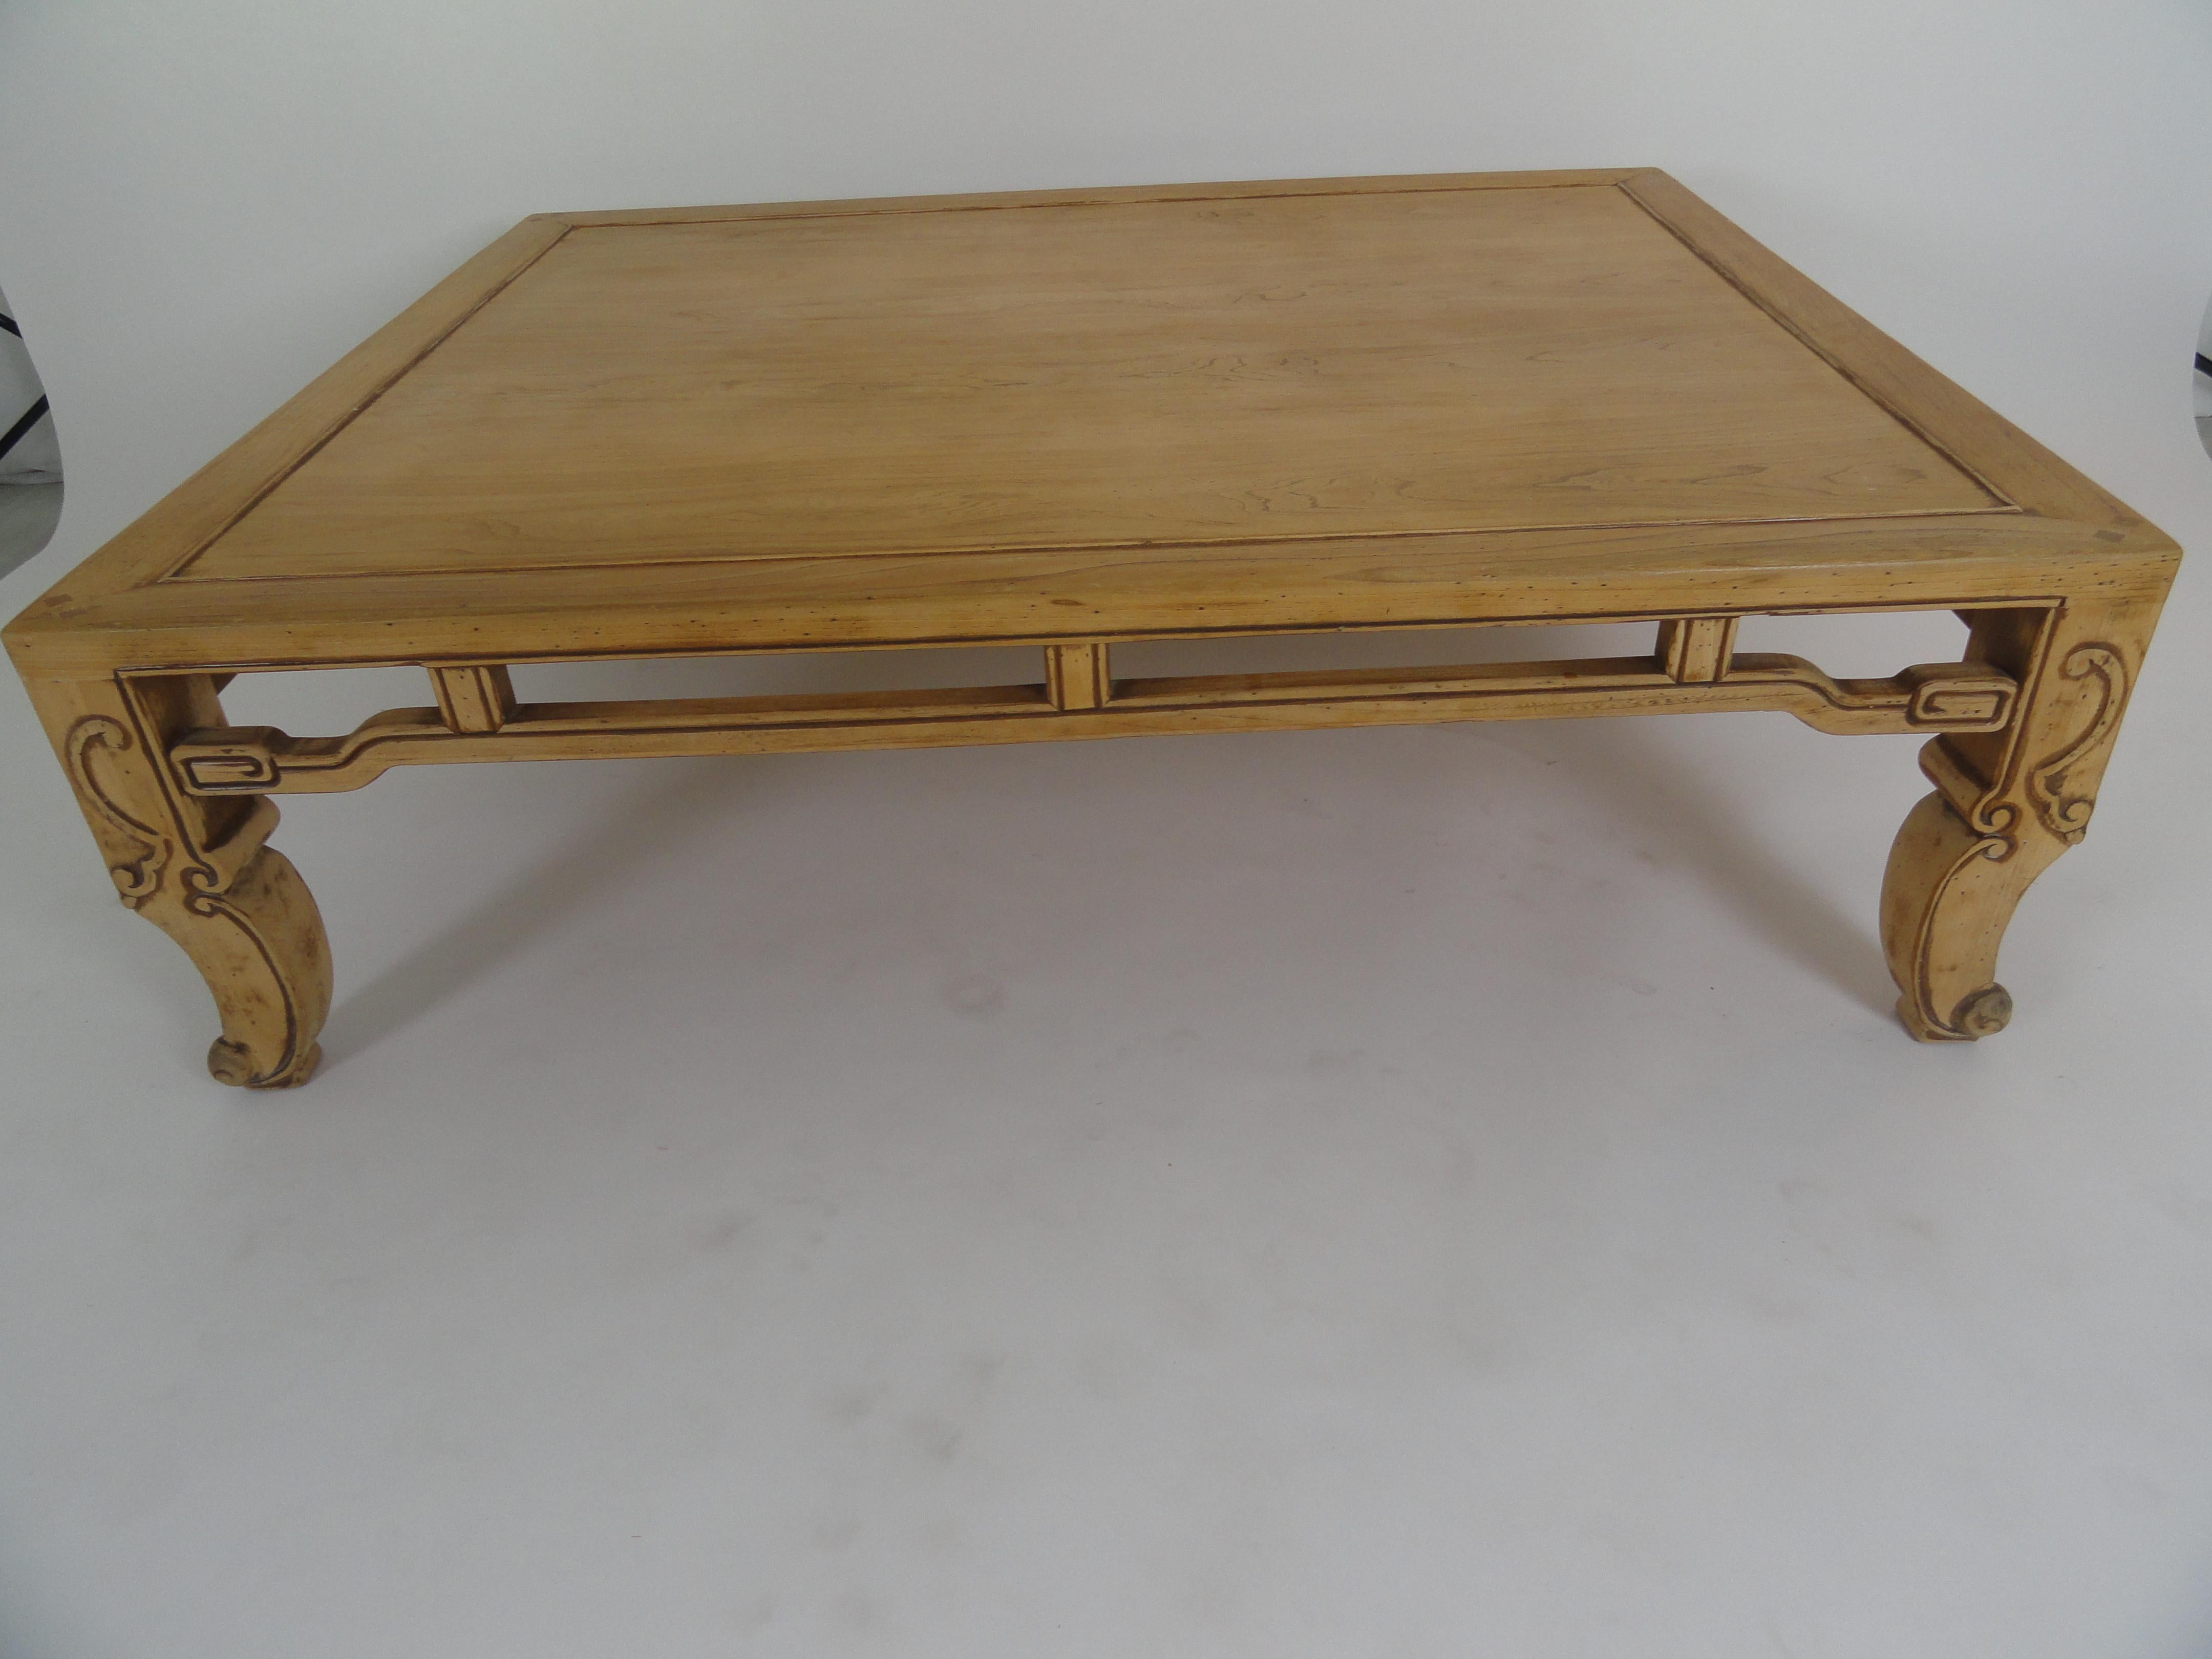 Baker Ming style coffee table in natural wood finish with detailed carving. Baker tag on bottom.